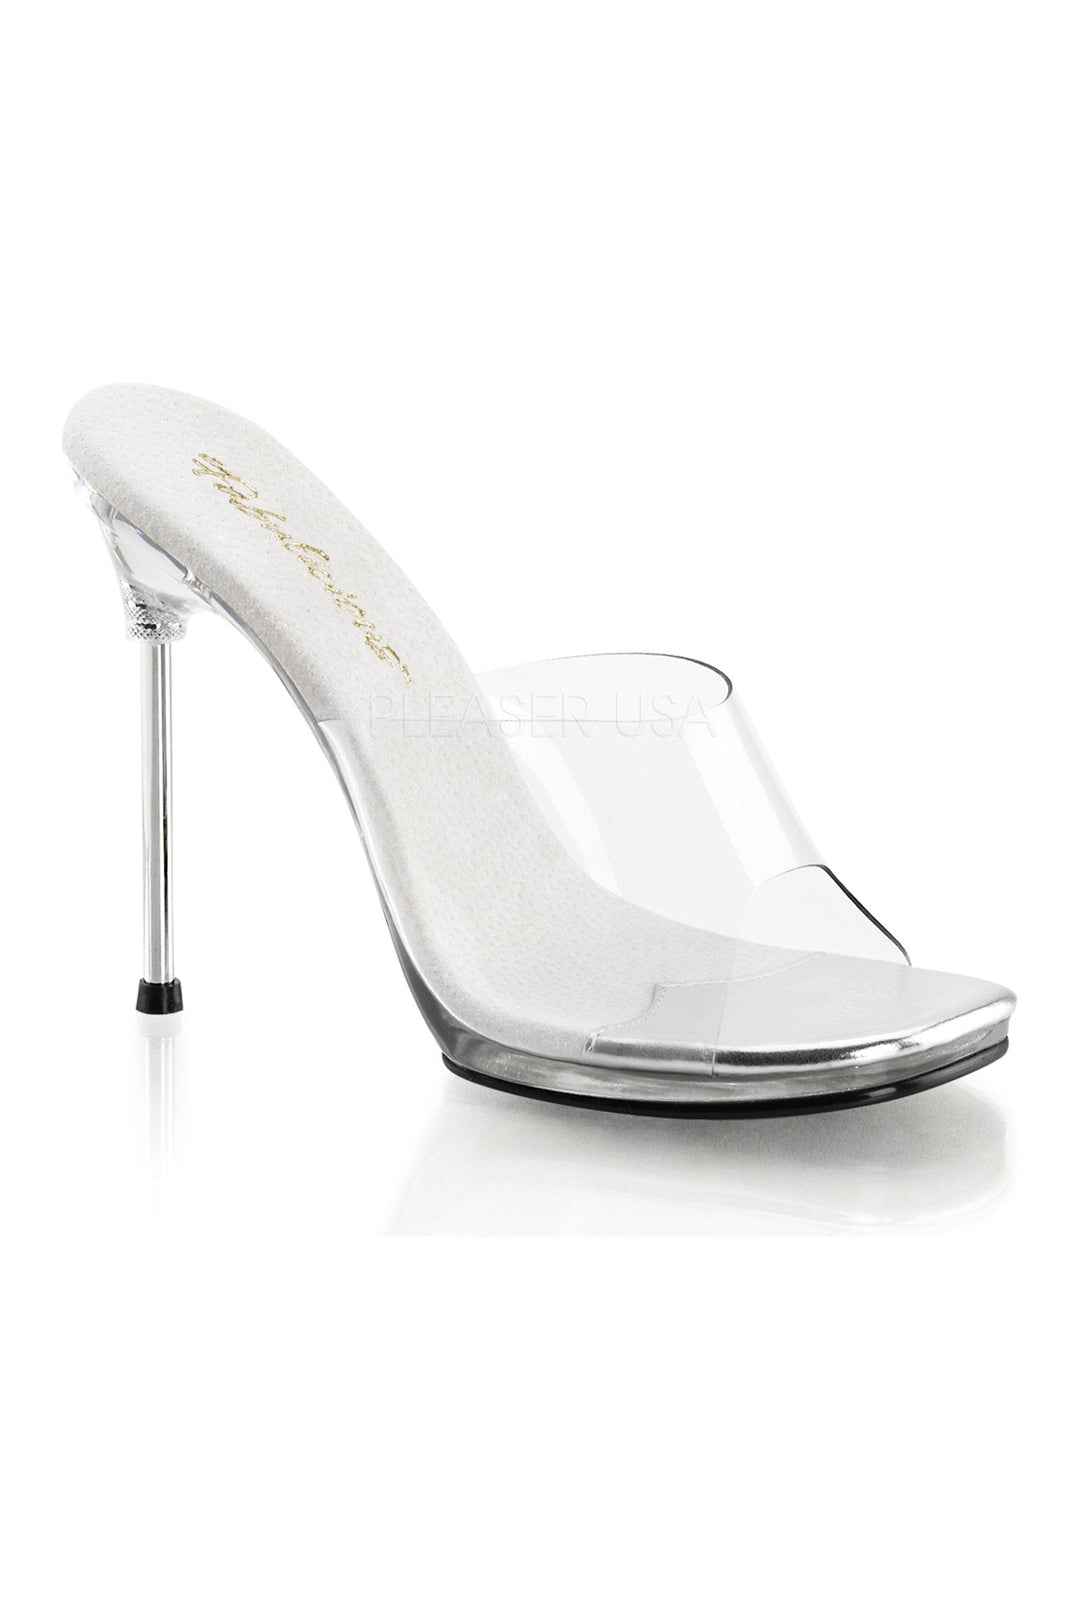 CHIC-01 Slide | Clear Vinyl-Slides-Fabulicious-Clear-9-Vinyl-SEXYSHOES.COM